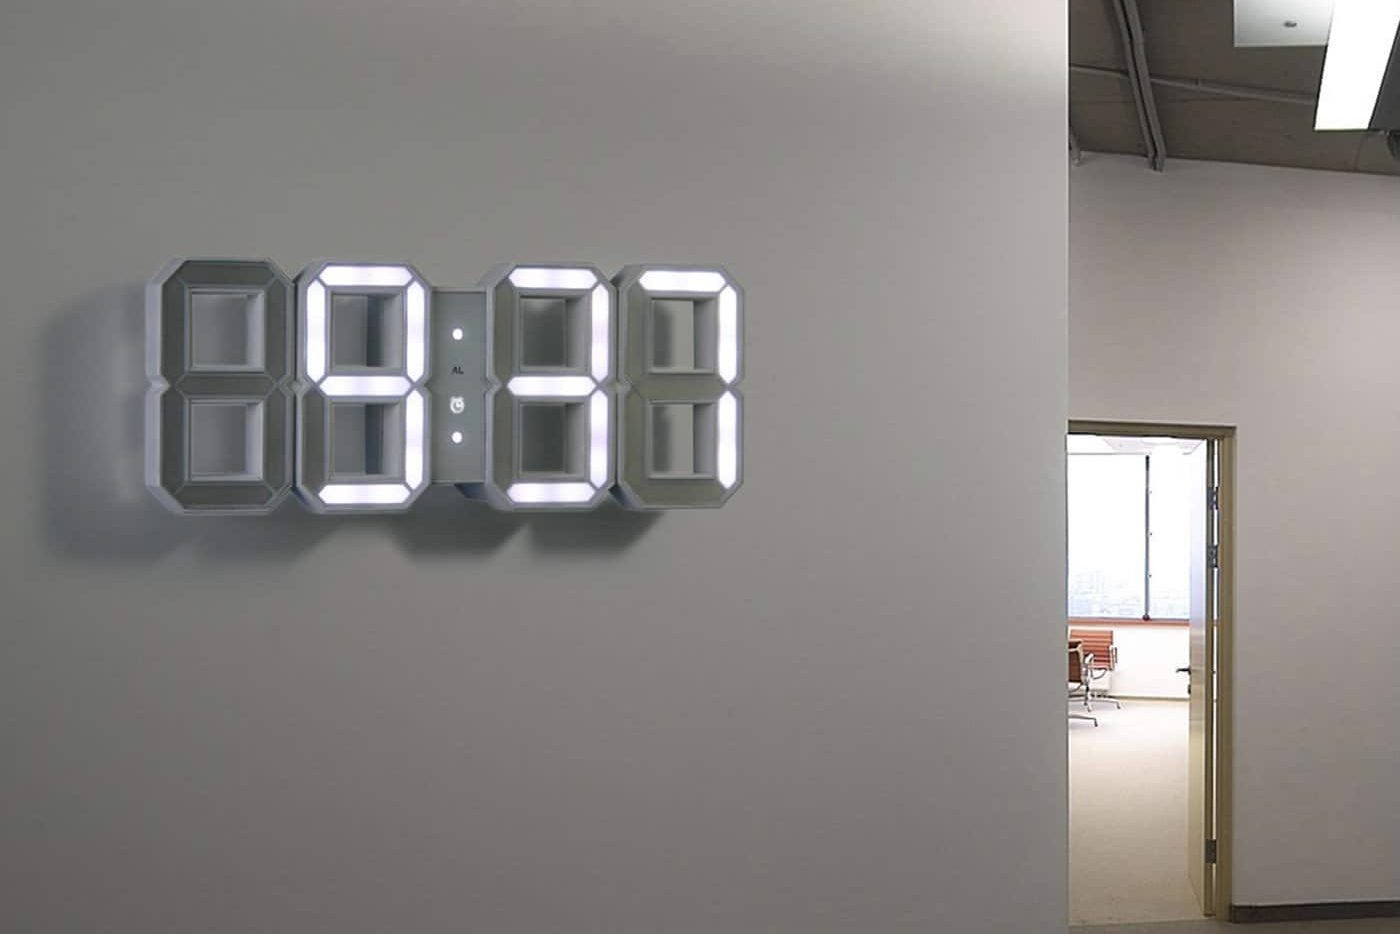 Buy and the Price of All Kinds of Wall Digital Clock